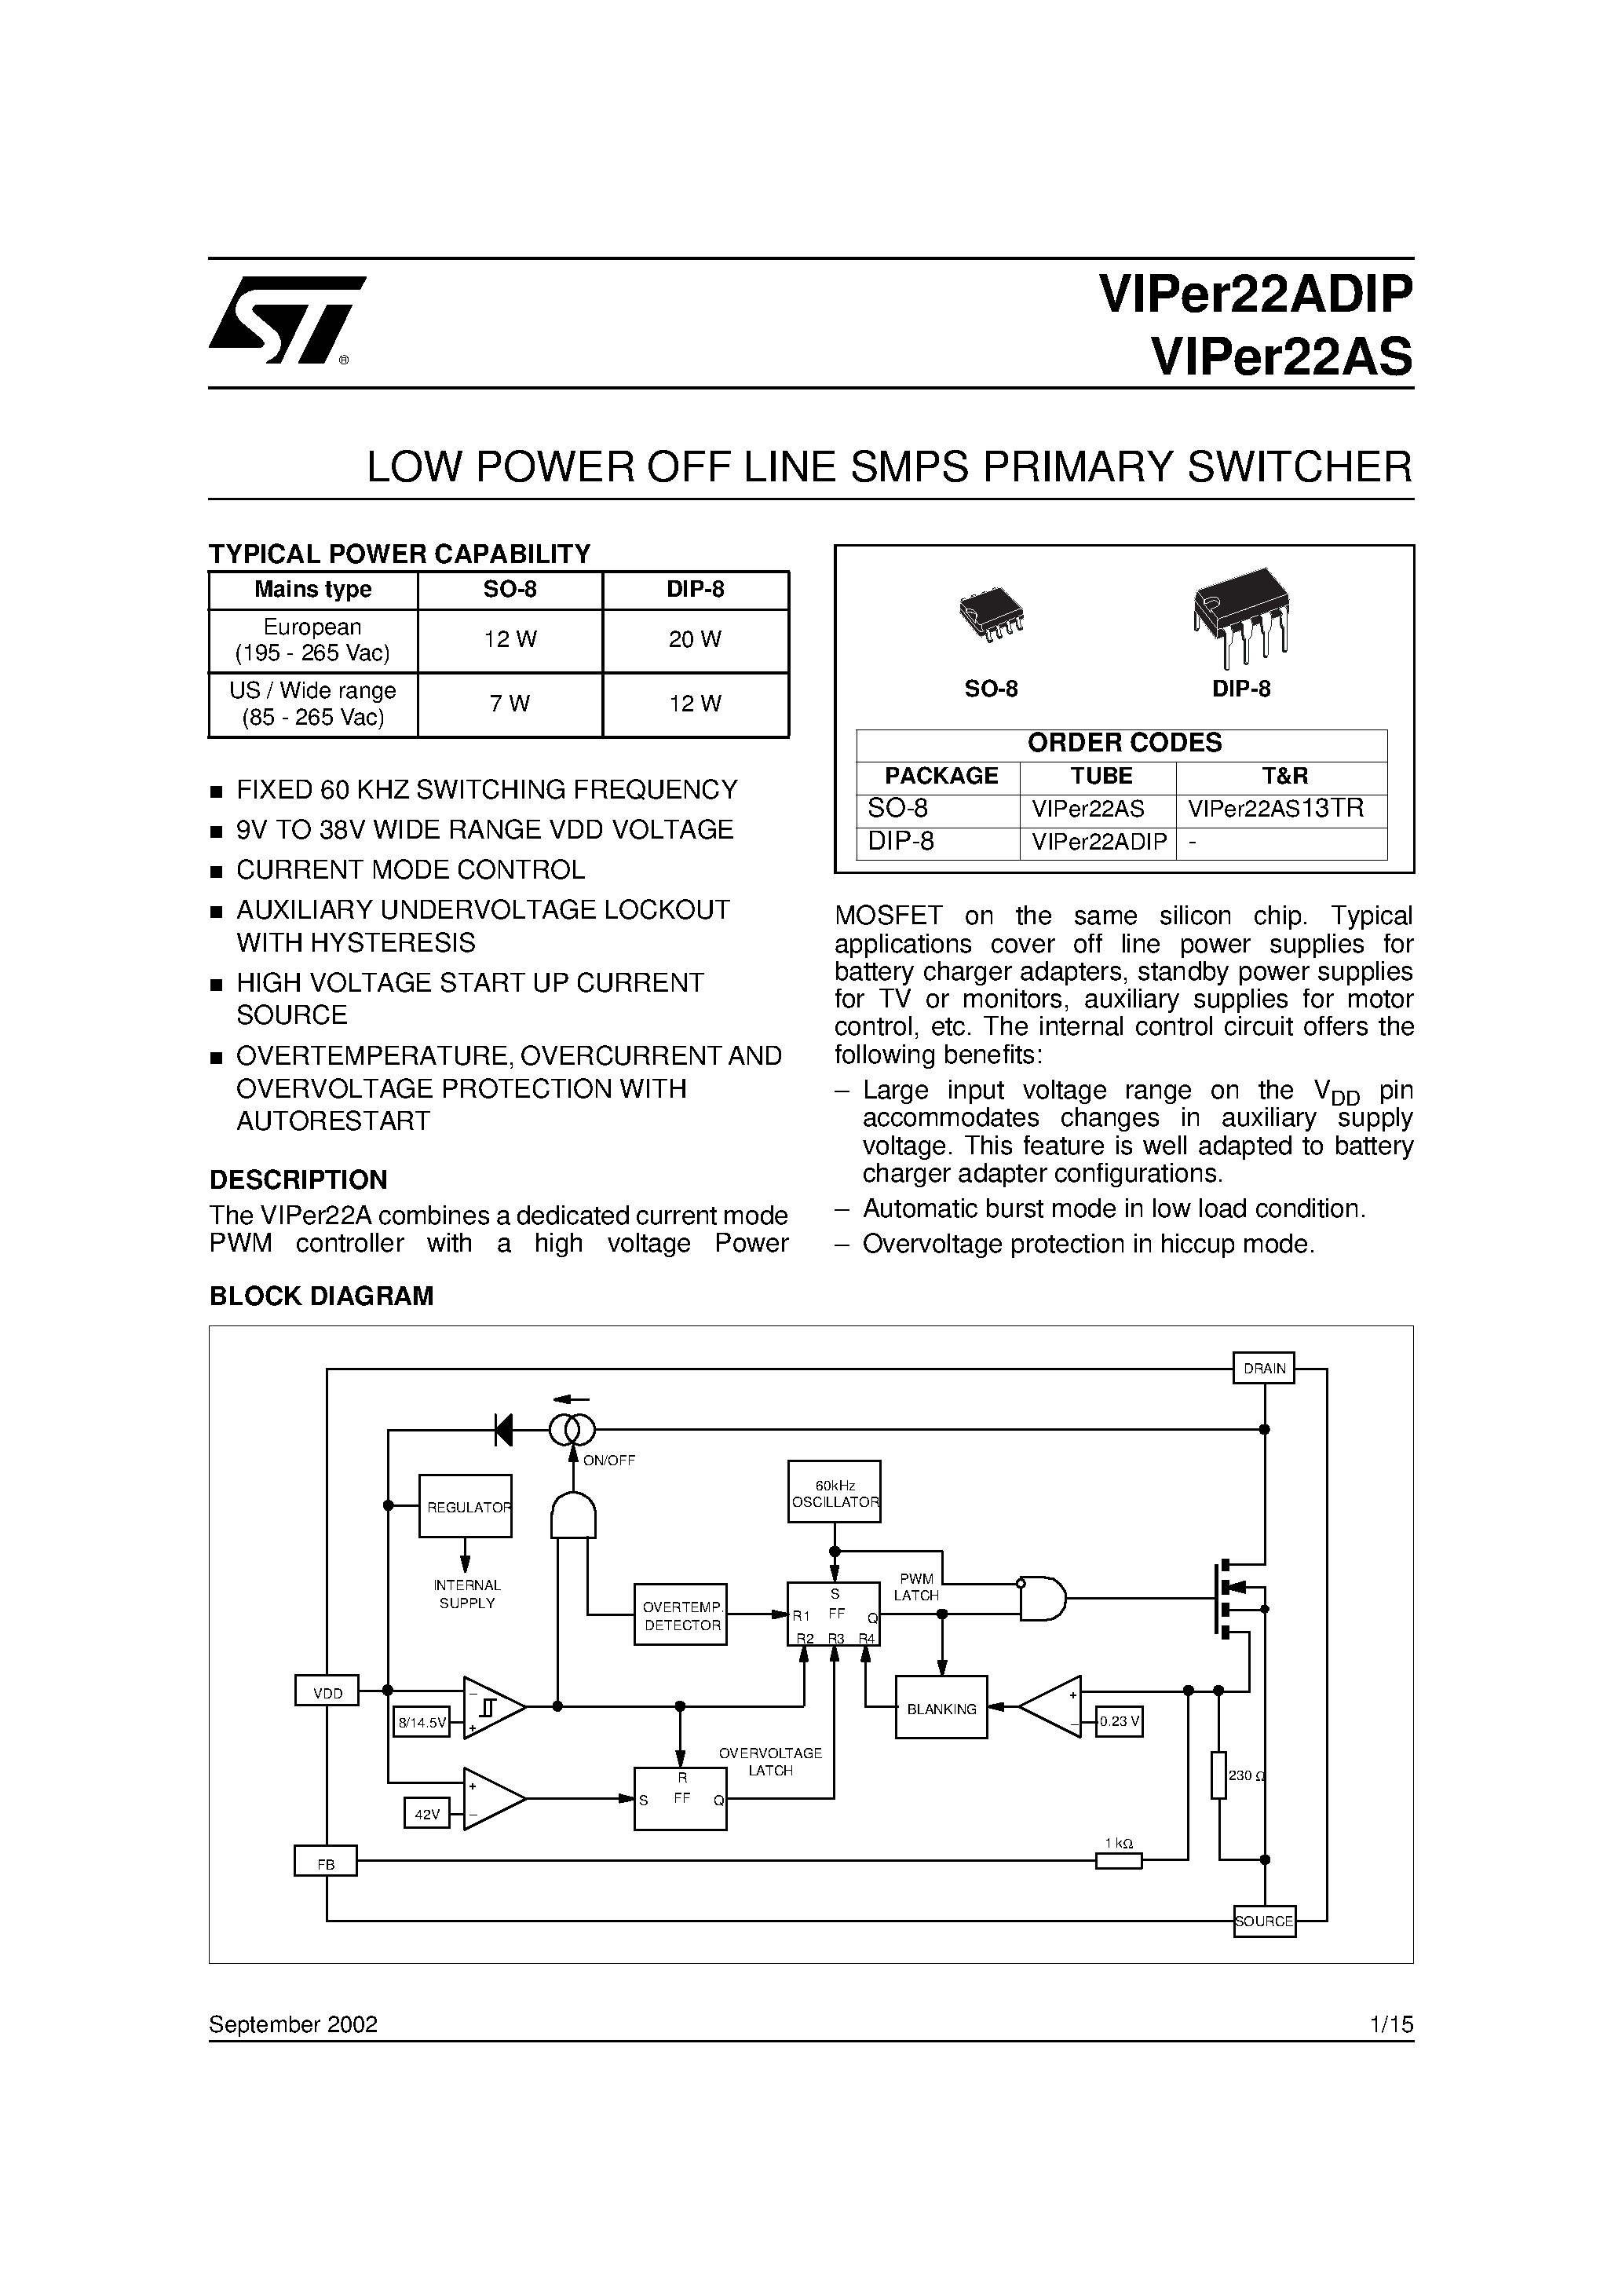 Datasheet VIPer22AS - LOW POWER OFF LINE SMPS PRIMARY SWITCHER page 1